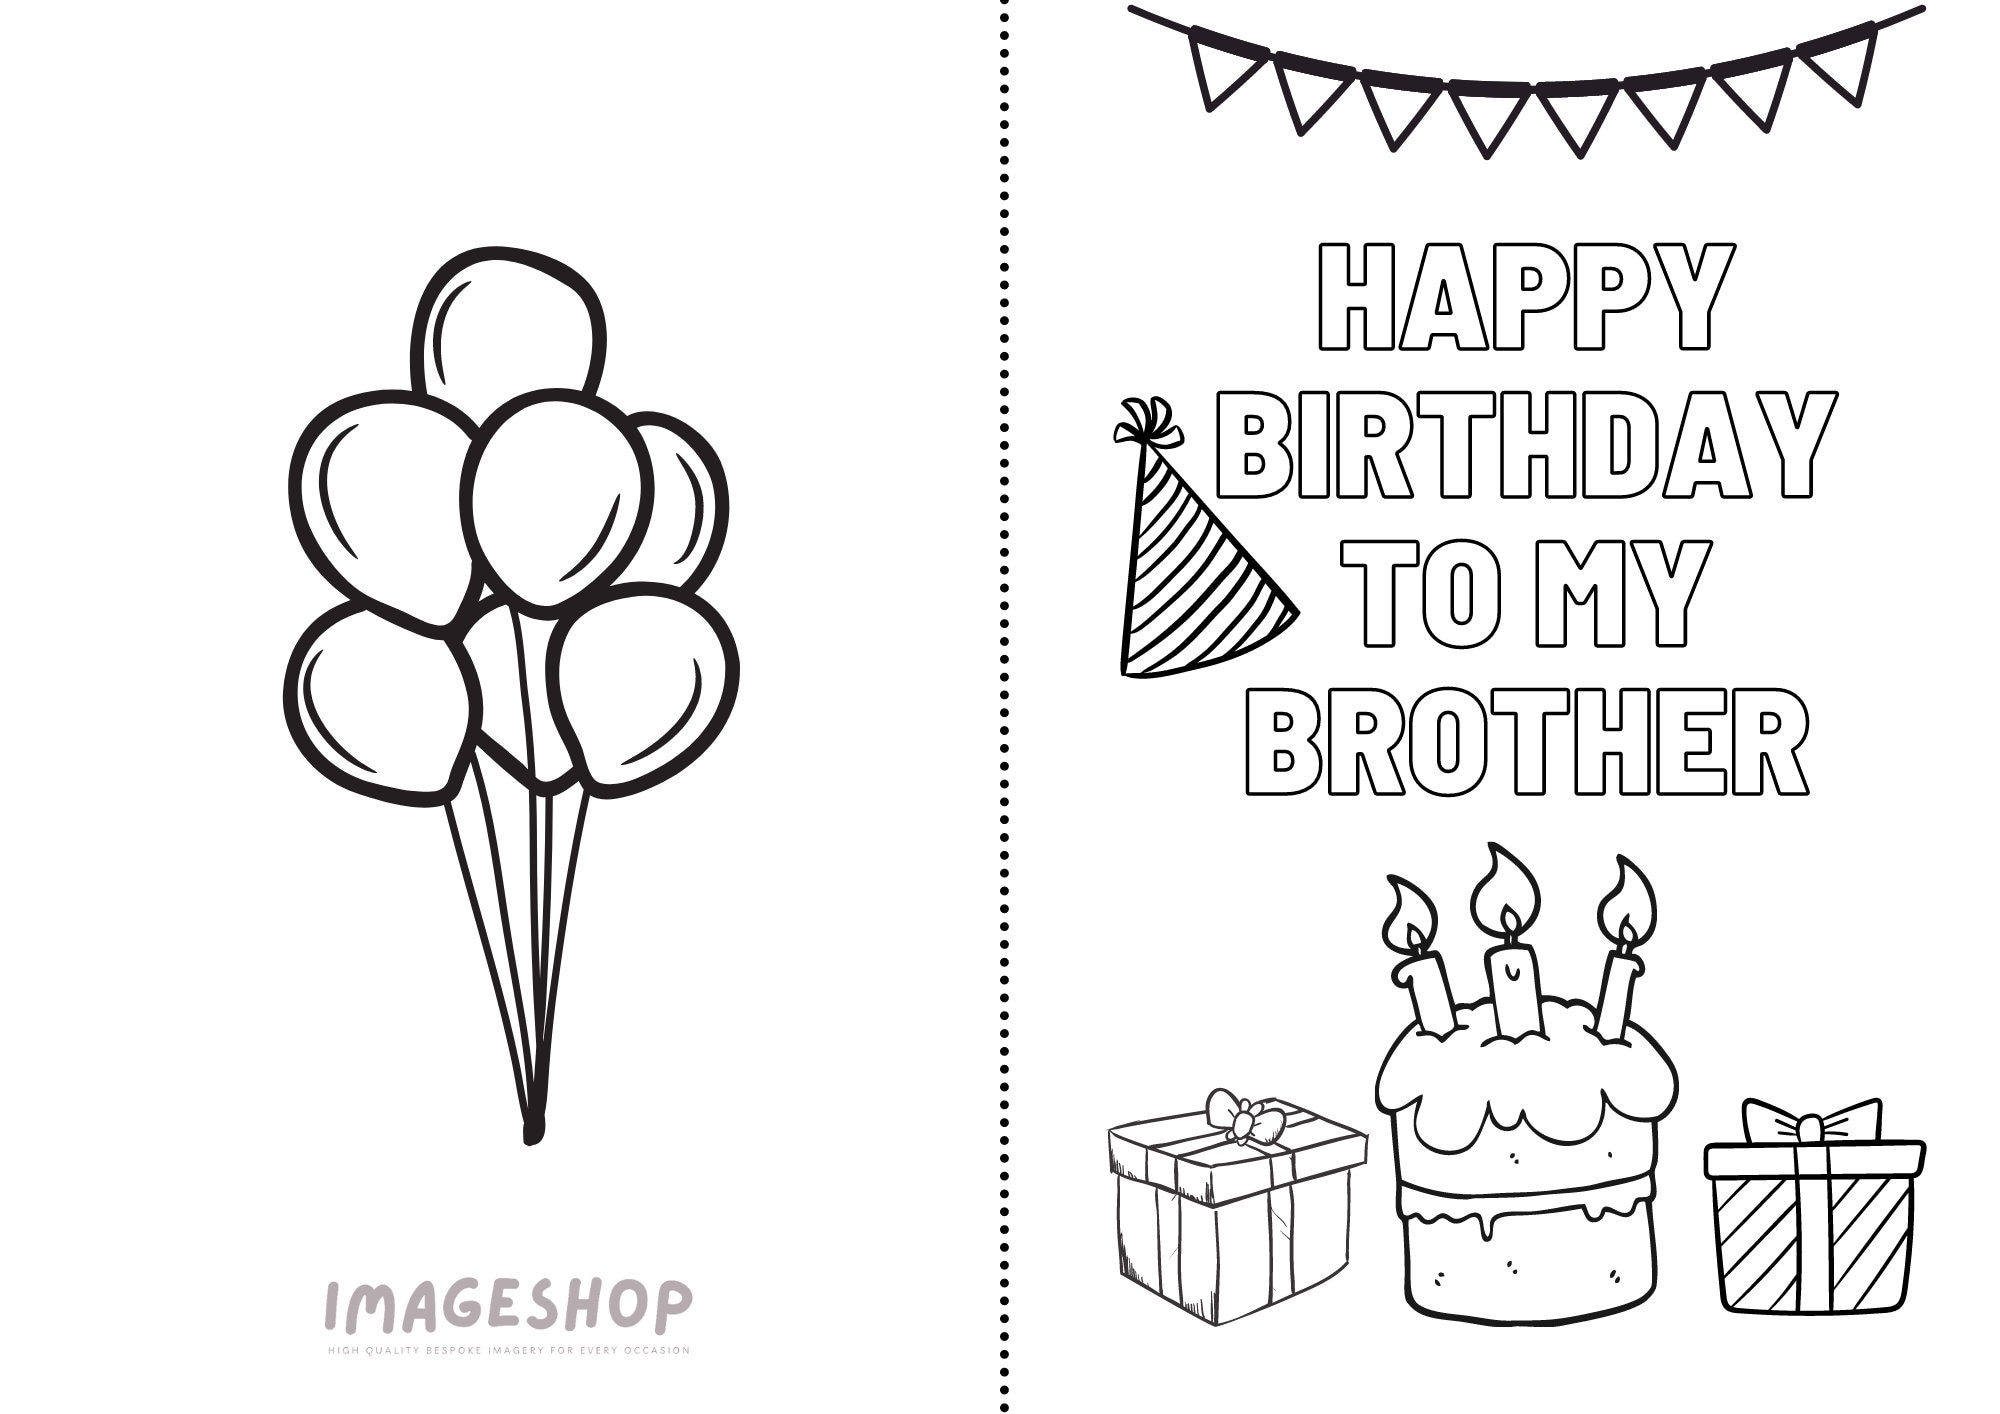 Happy Birthday Brother Happy Birthday Card Colouring In Card Printable Digital Download Instant Download Colour In Happy Birthday Etsy - Free Printable Birthday Cards For Brother